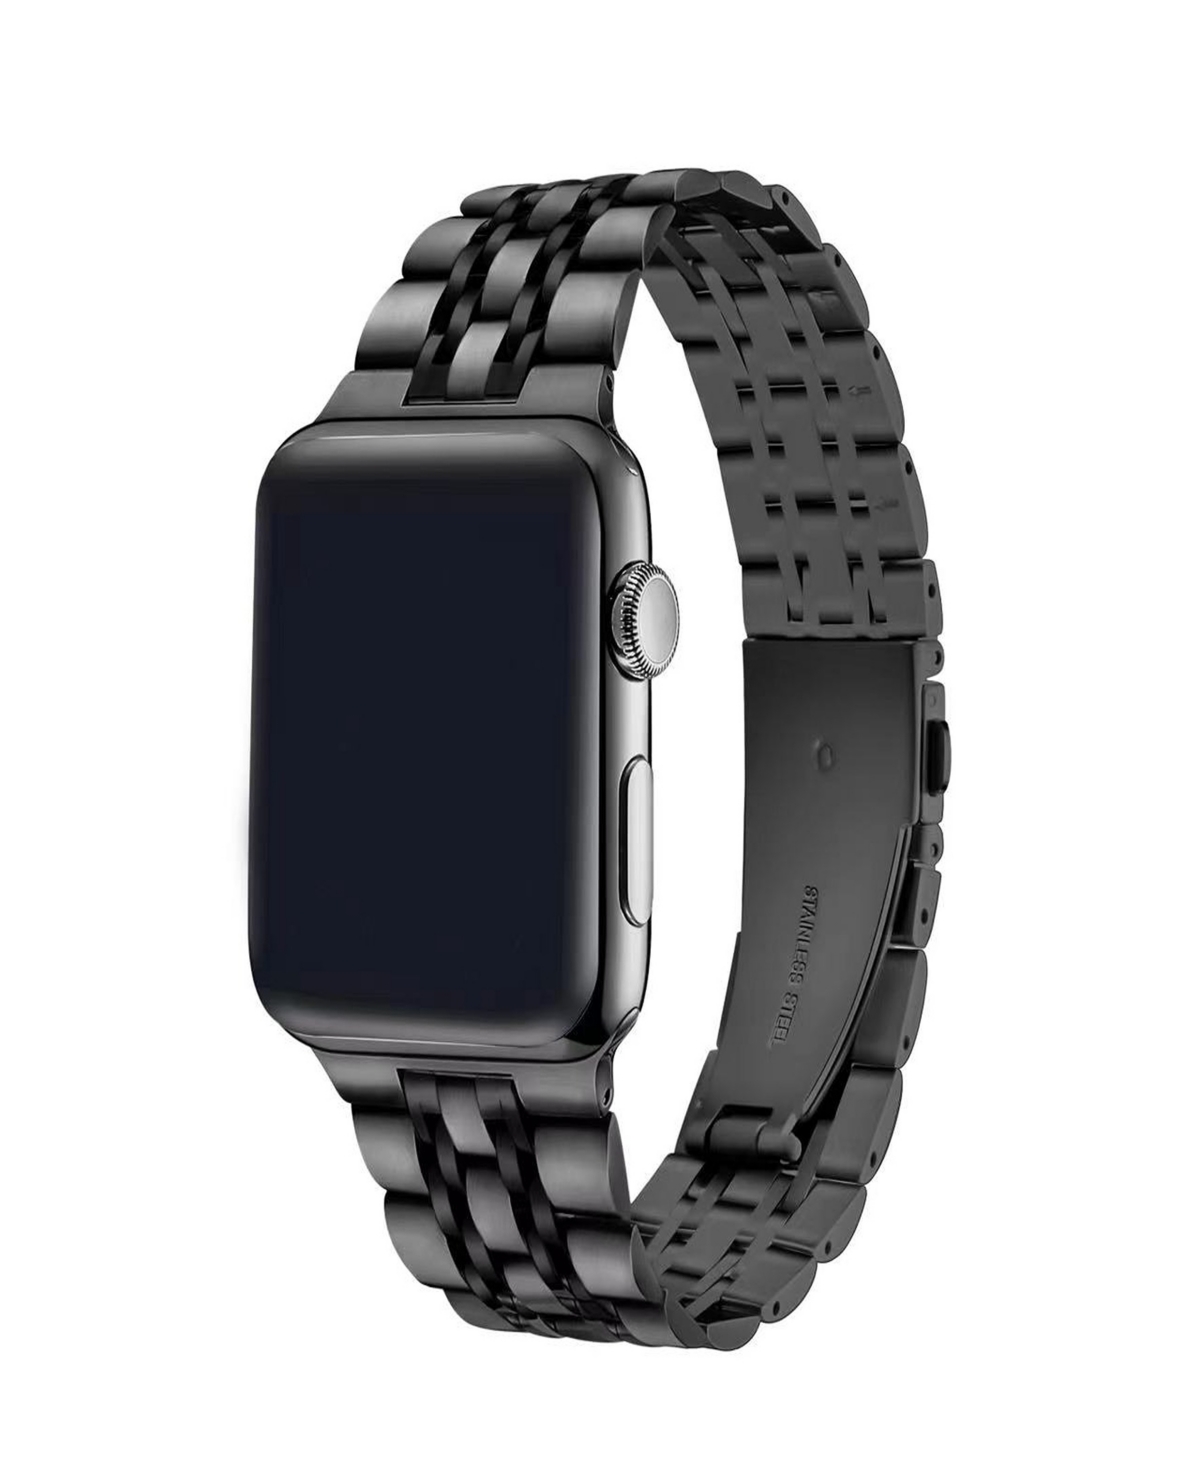 Unisex Rainey Stainless Steel Band for Apple Watch Size- 38mm, 40mm, 41mm - Two Tone